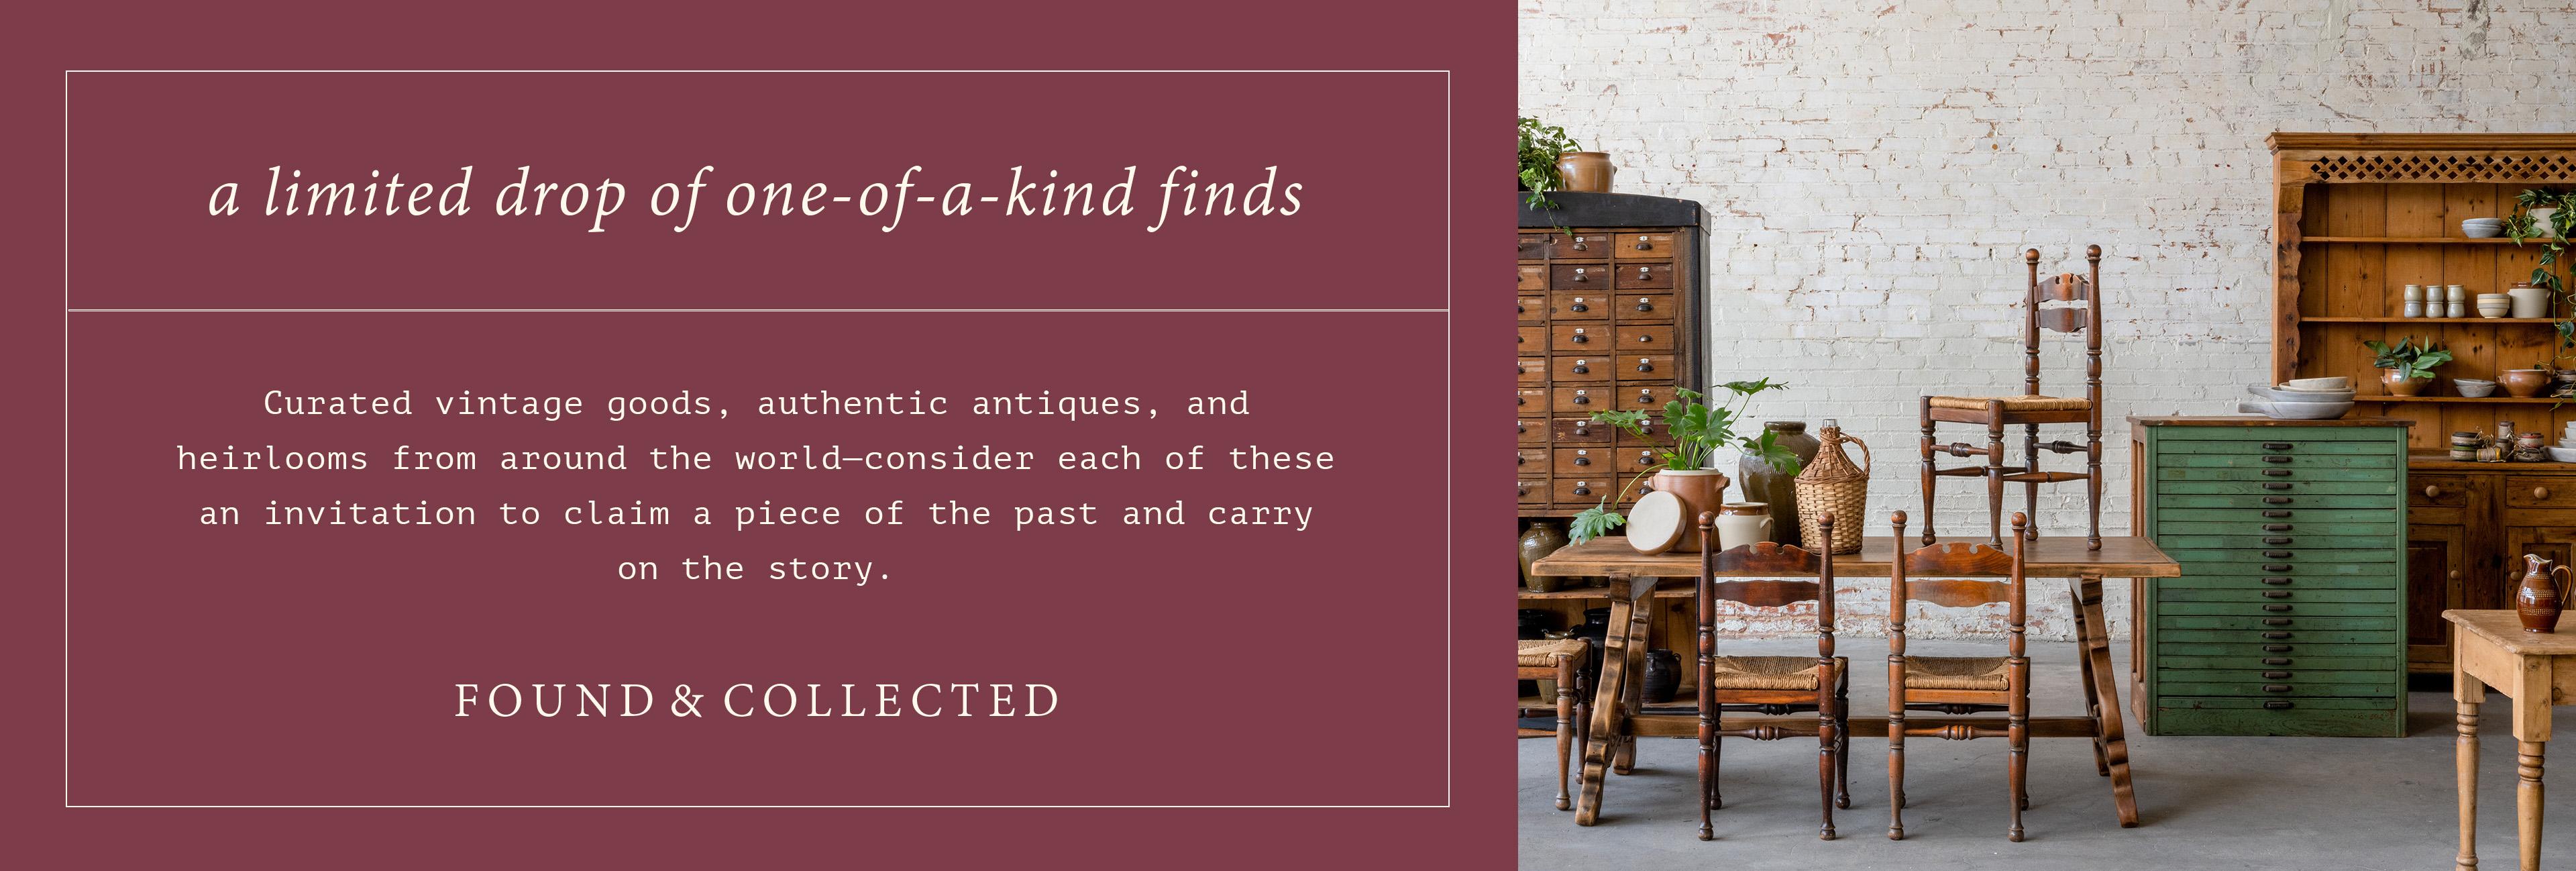 a limited drop of one-of-a-kind finds - curated vintage goods, authentic antiques, and heirlooms from around the world-consider each of these an invitation to claim a piece of the past and carry on the story. Found and collected. antique furniture is pictured. 